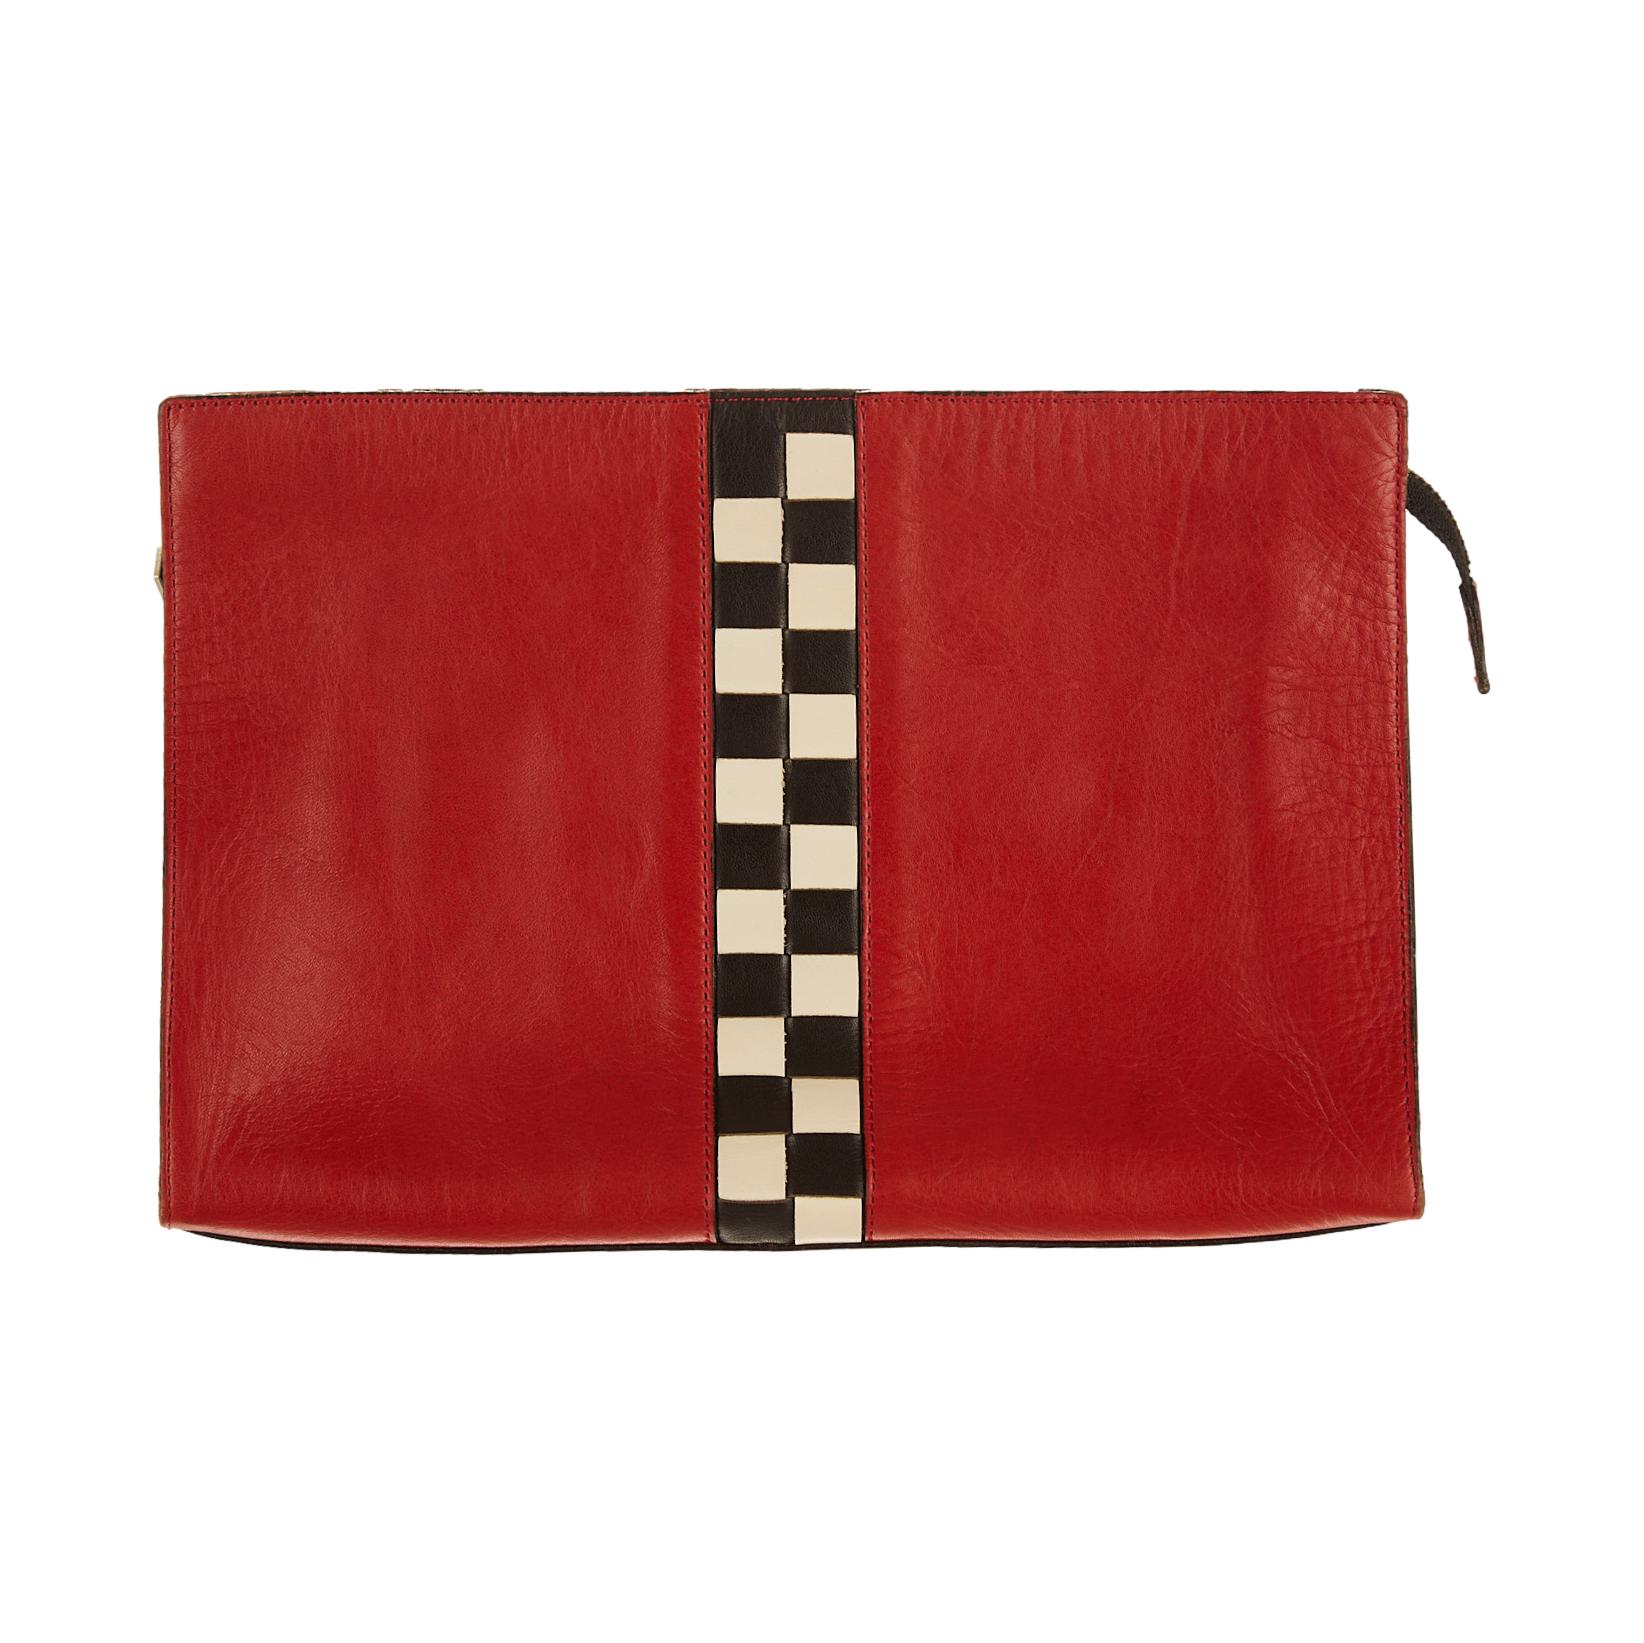 Jean Paul Gaultier Red Checkered Clutch